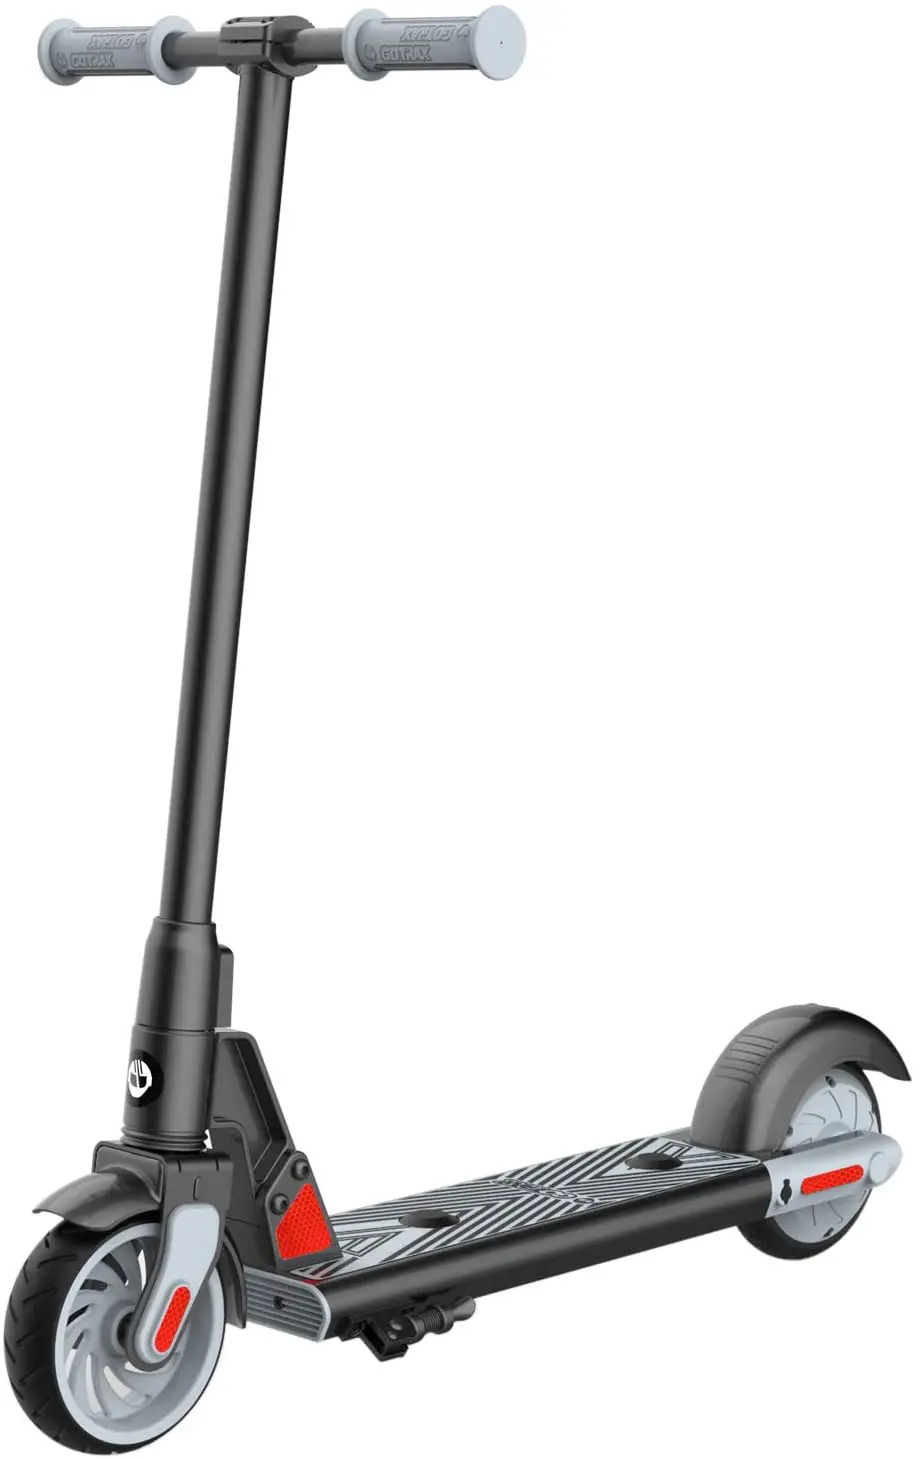 GoTrax GKS (7.5 MPH) Best Affordable Electric Scooter